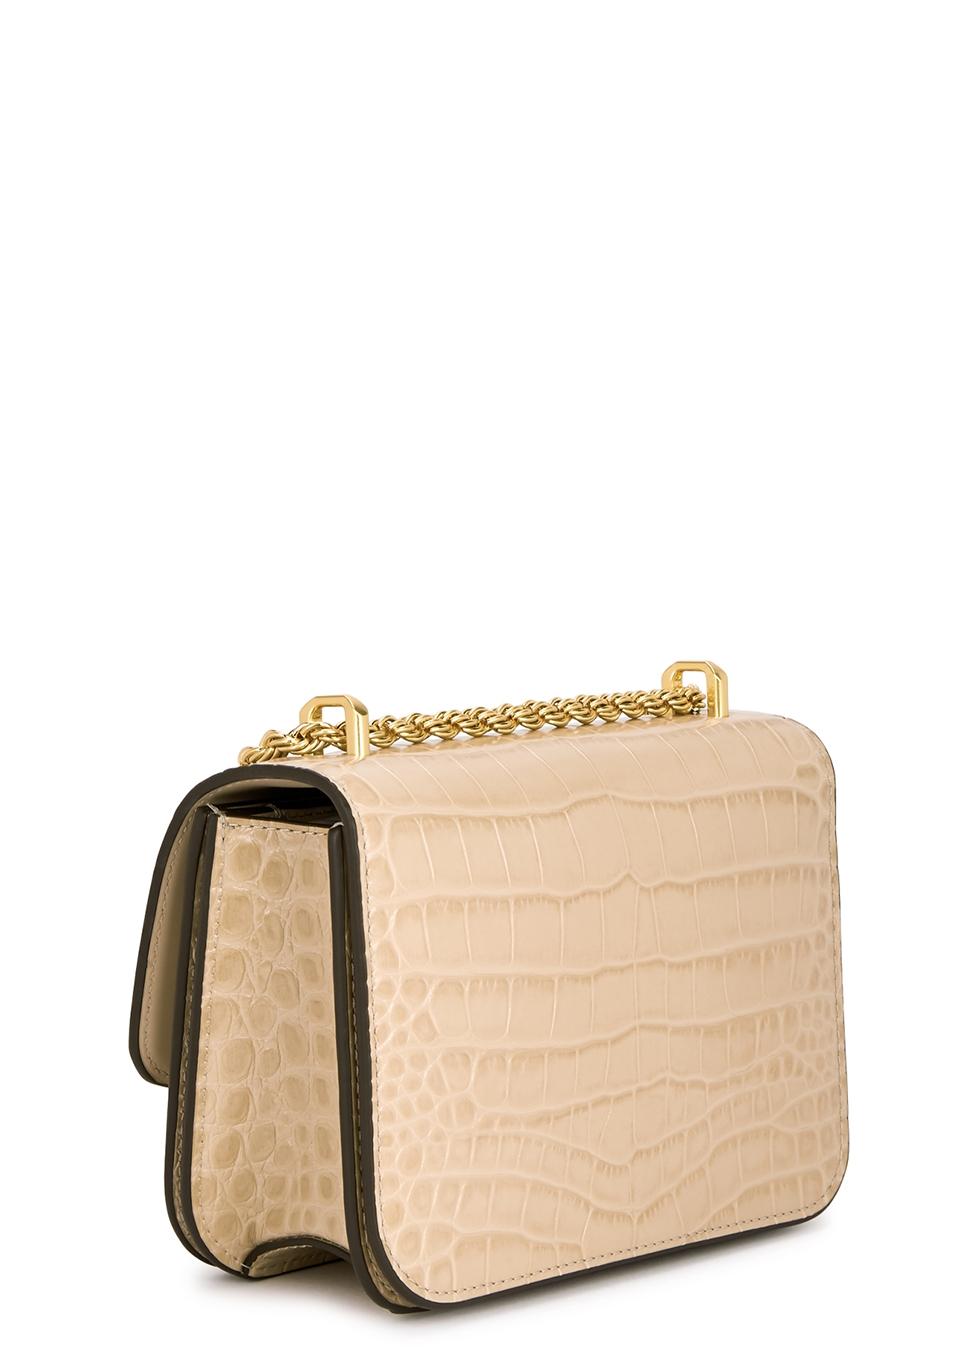 Tory Burch Eleanor Small Crocodile-effect Leather Shoulder Bag in Natural |  Lyst